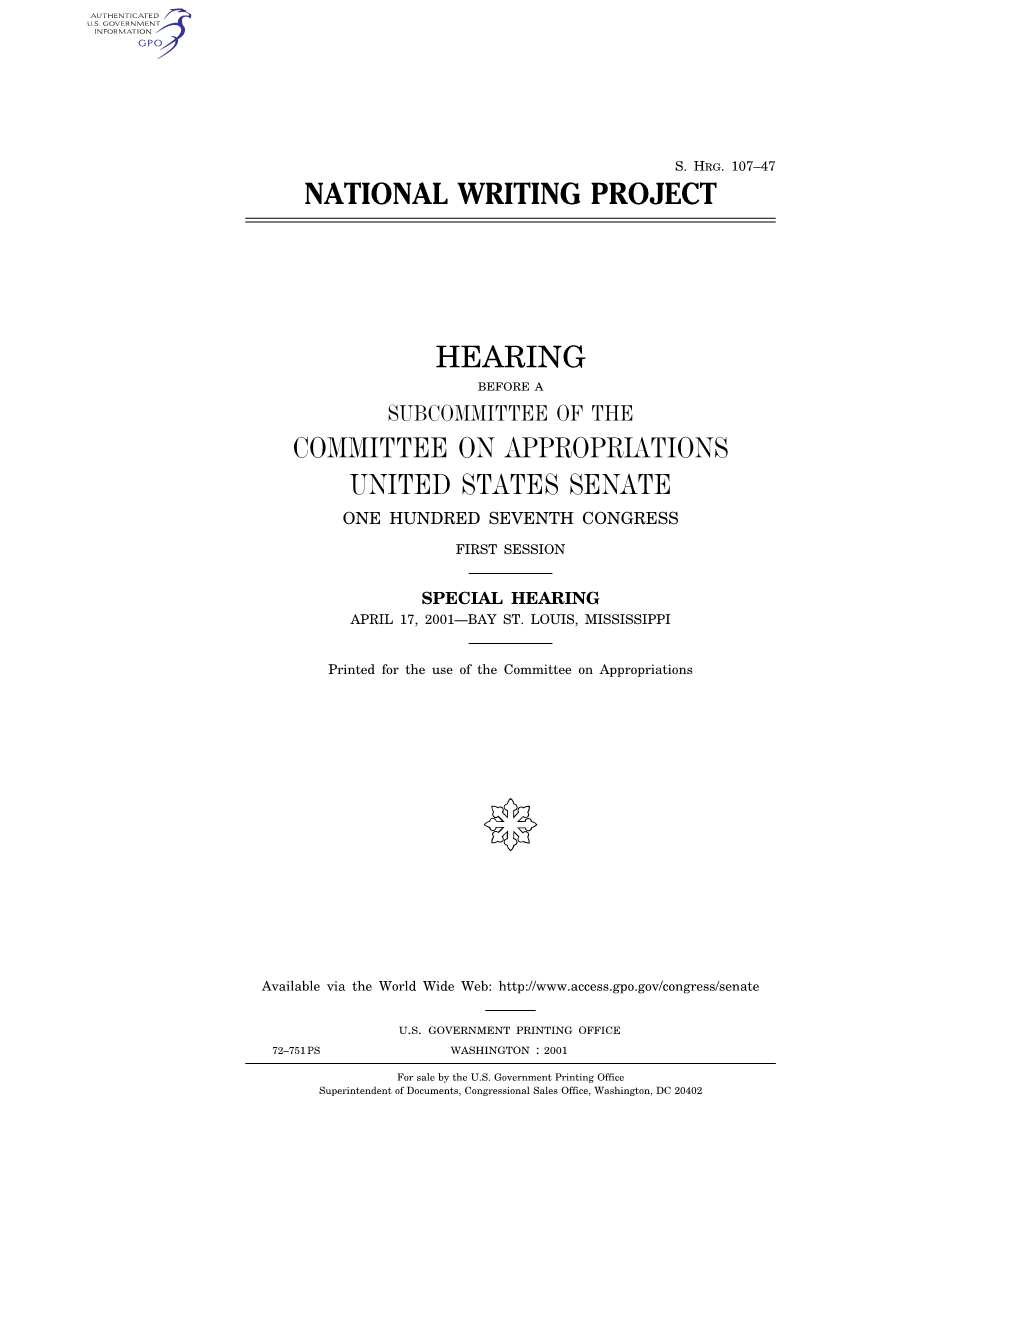 National Writing Project Hearing Committee On